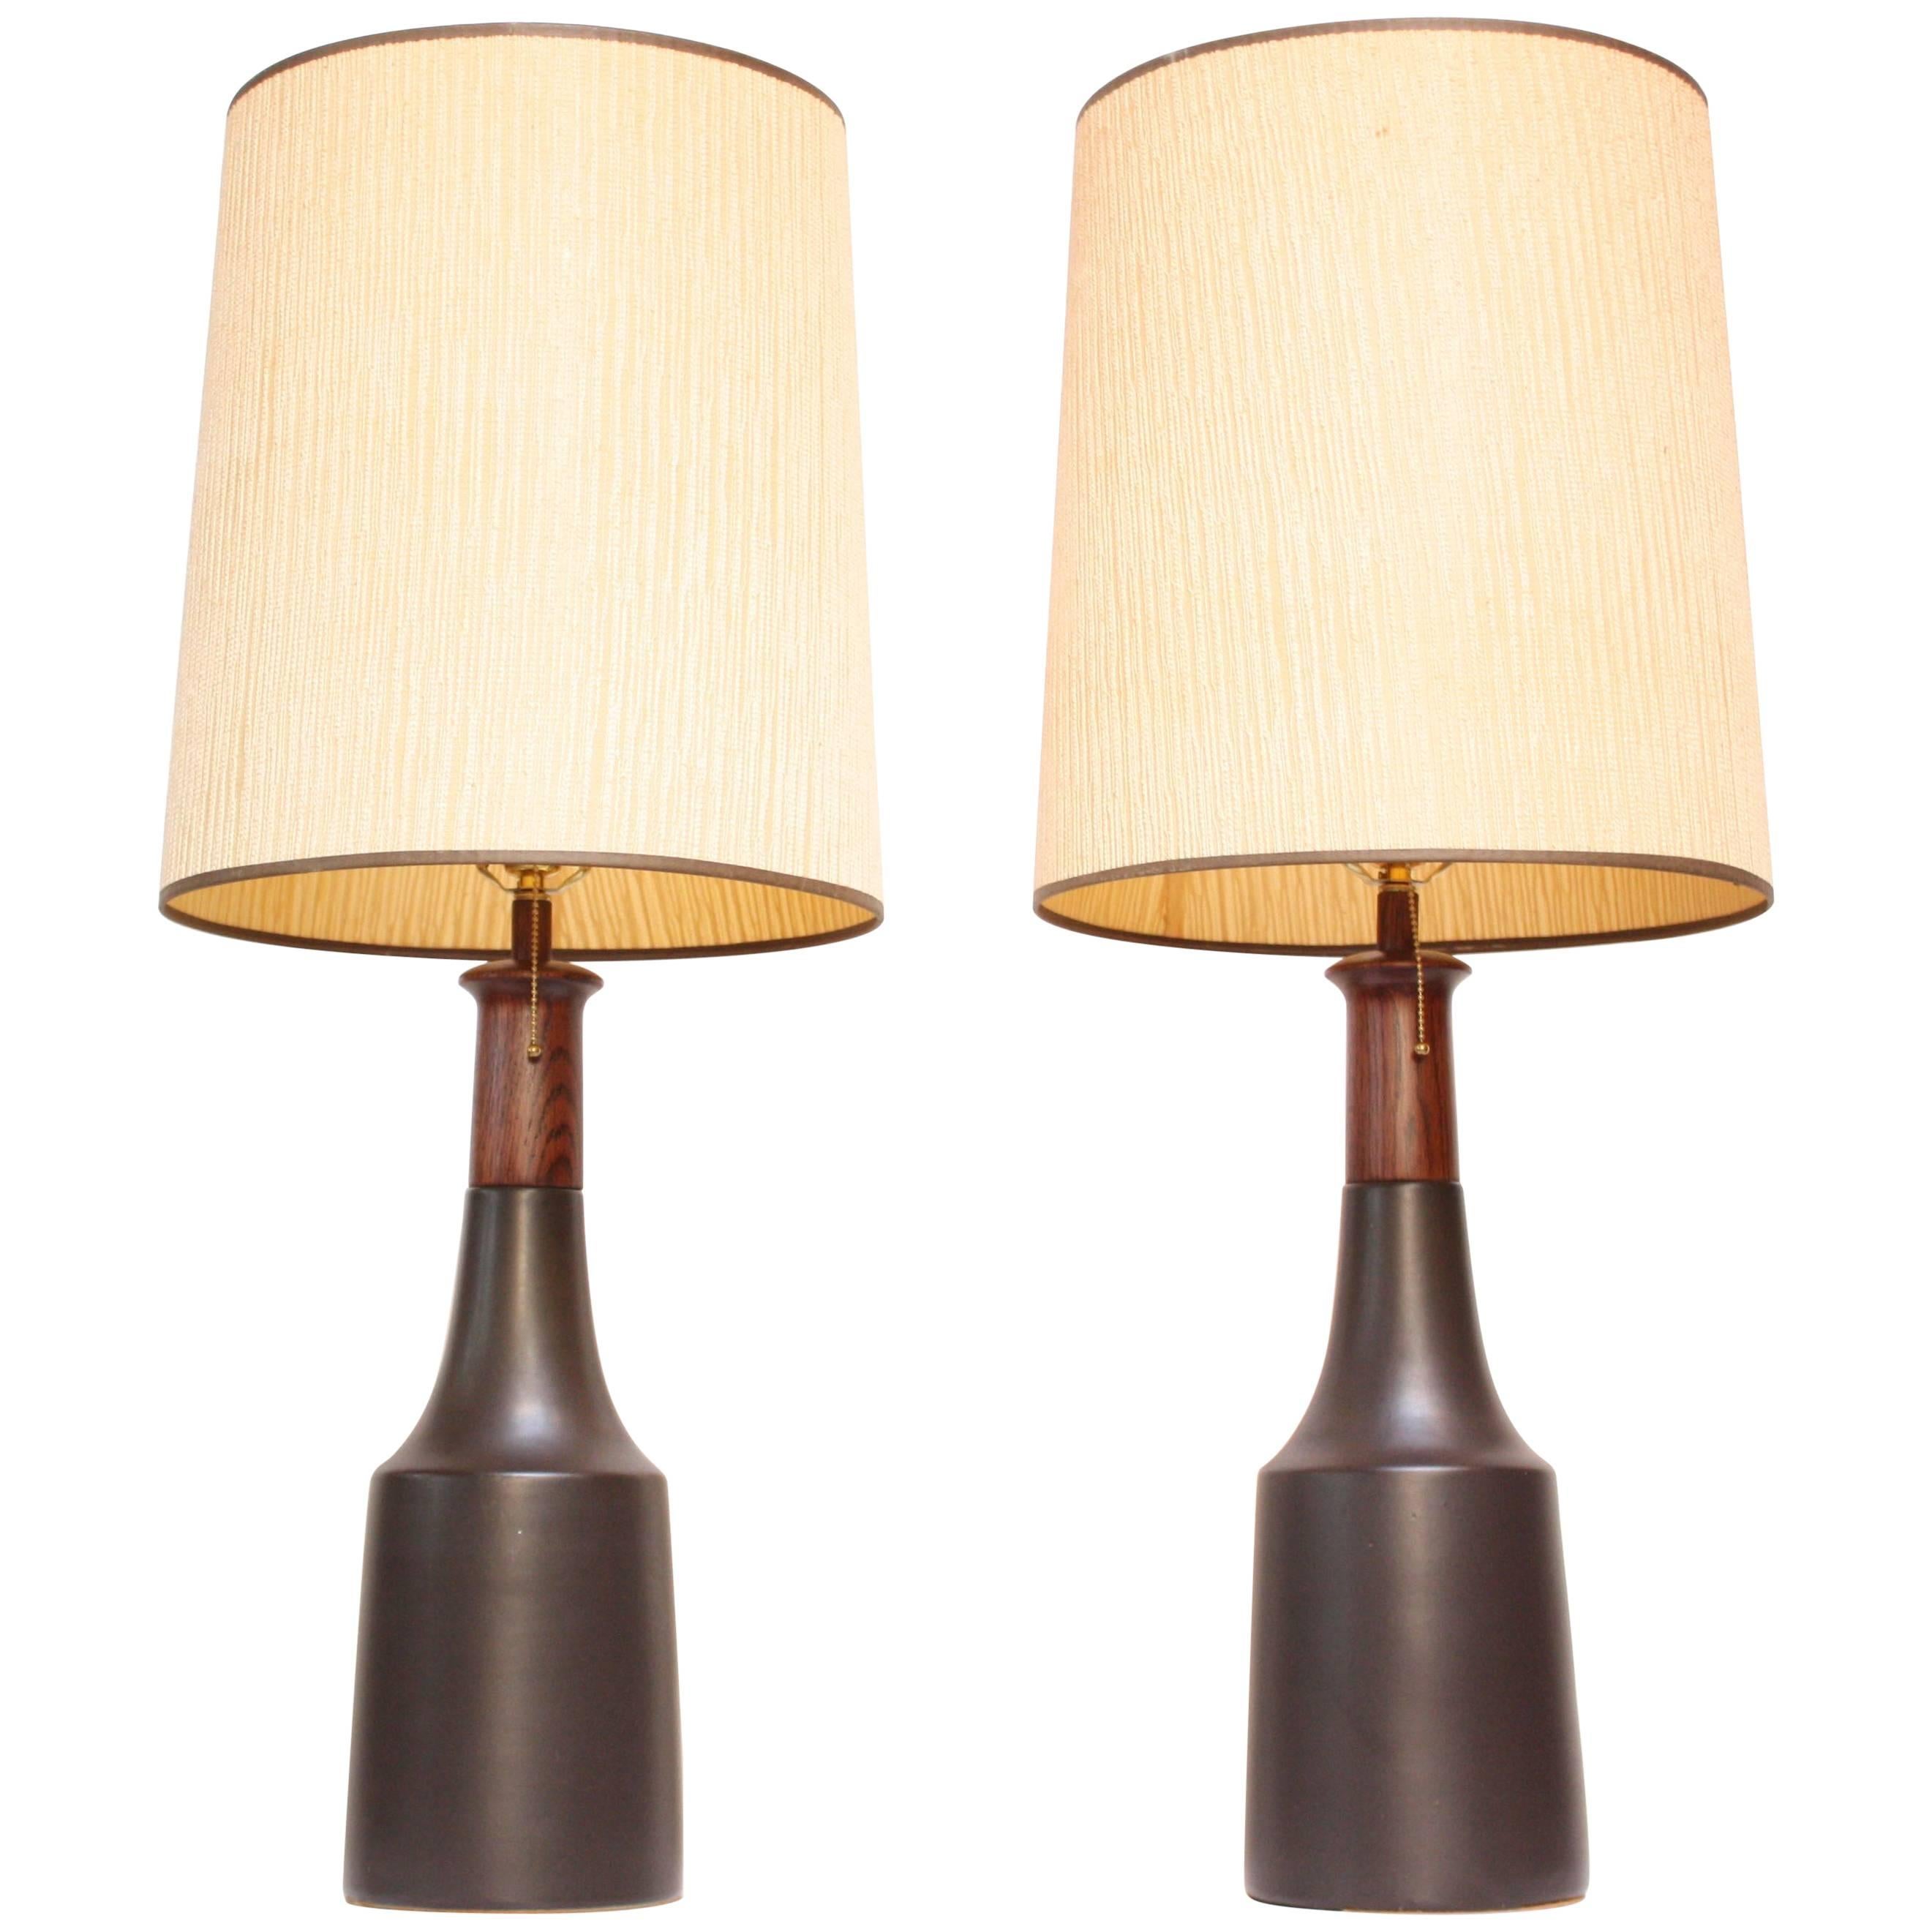 Pair of Tall Martz for Marshall Studios Stoneware Table Lamps